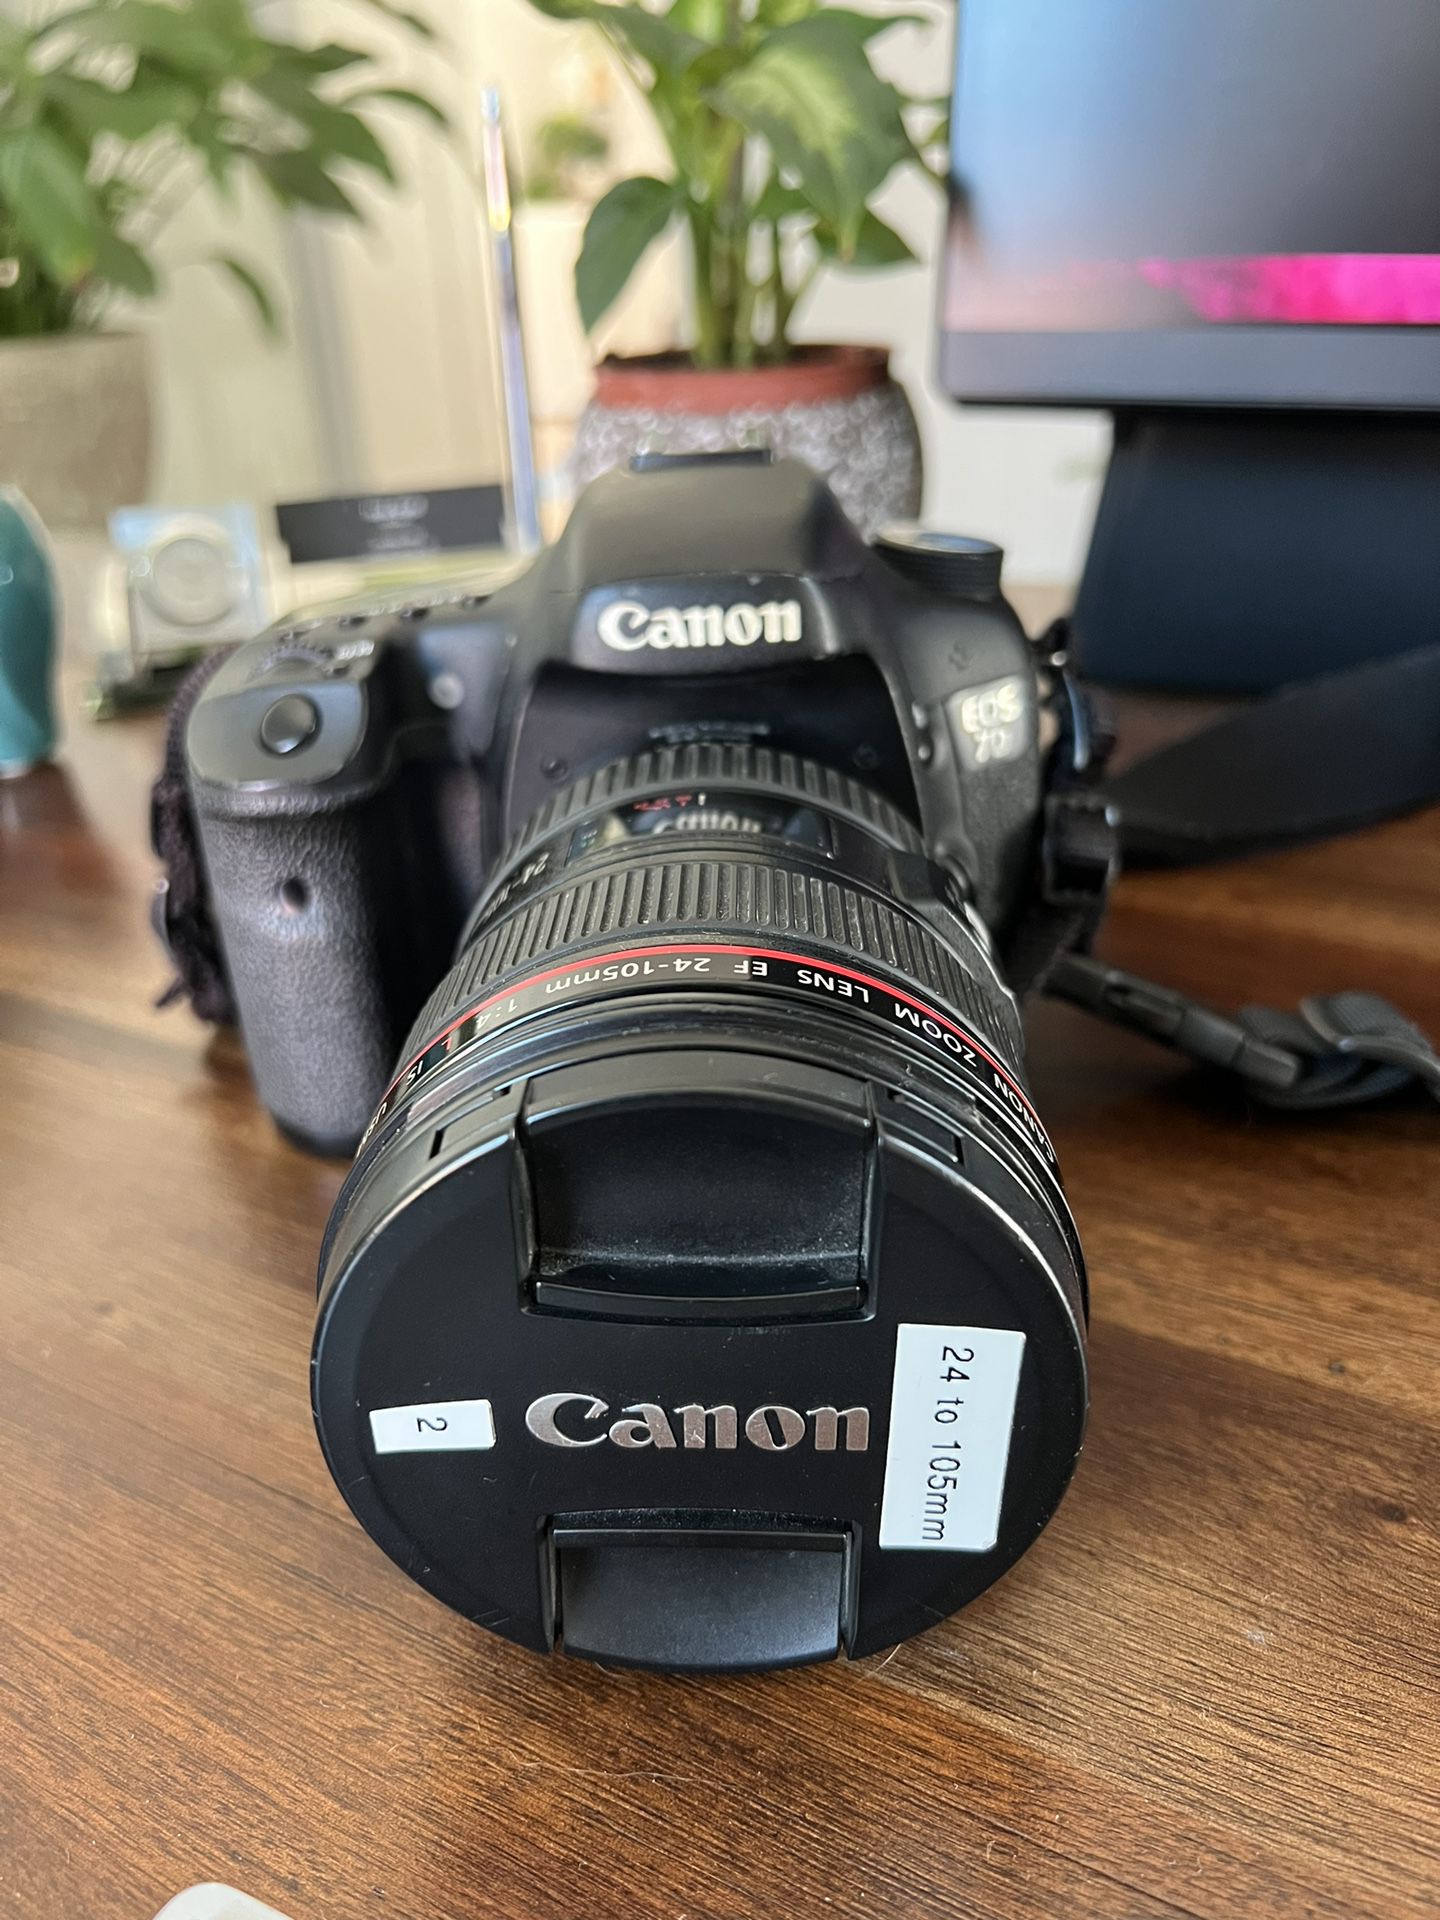 Canon 7D - Used $200 OBO 